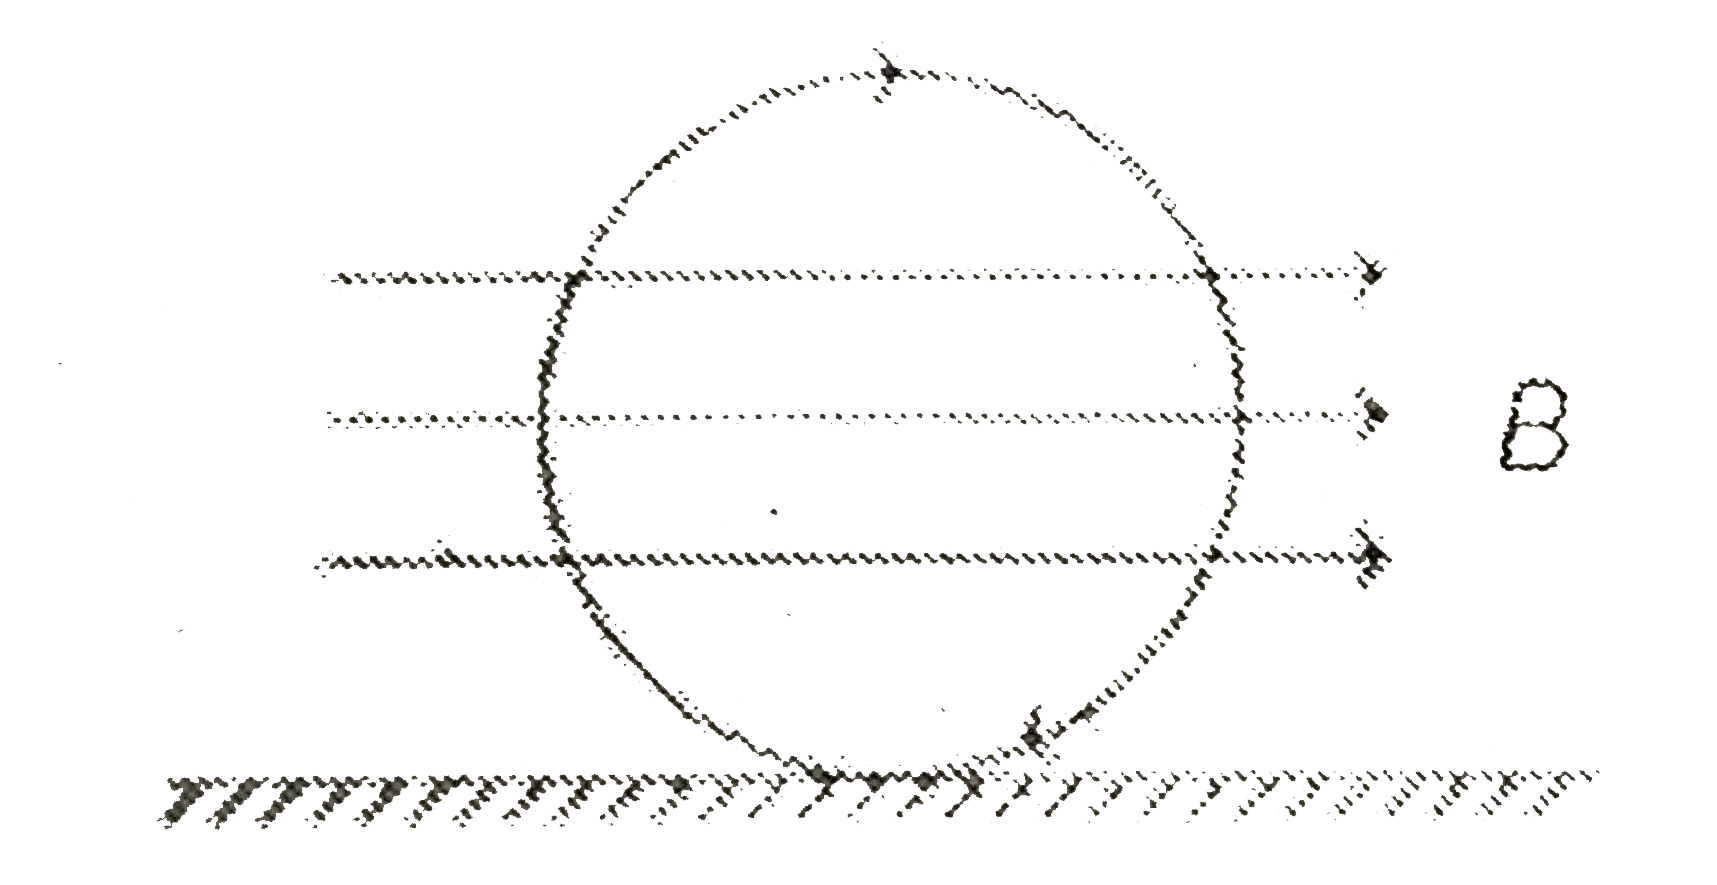 A conducting ring  of mass  2 kg  and radius 0.5 m is  palced on  a smooth  horizationl  plante  . The    ring carries a  cuurent i=4 A.  A horizationtal   magnetic  field B=10  T is  initinal  angular  acceleration  of the  ring  will be